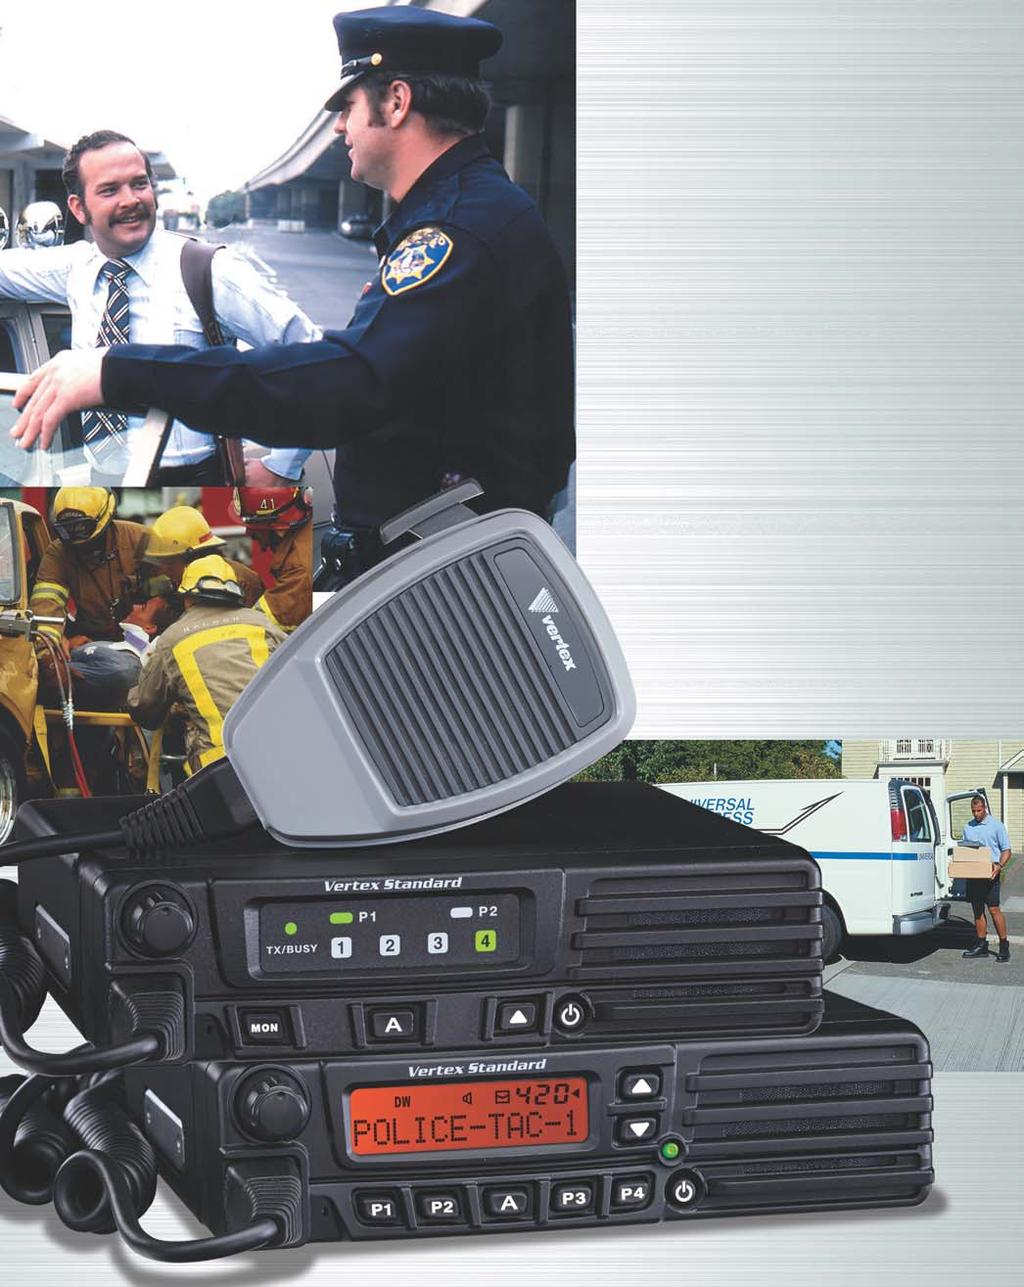 VX-4100/4200SERIES VHF/UHF Mobile Radios HIGH POWER OUTPUT (50W VHF/45W UHF) WIDE FREQUENCY SPAN 134-174 MHz (VX-4104/4204) 400-470 MHz / 450-520 MHz (VX-4107/4207) 501 CHANNELS/32 GROUPS (VX-4200